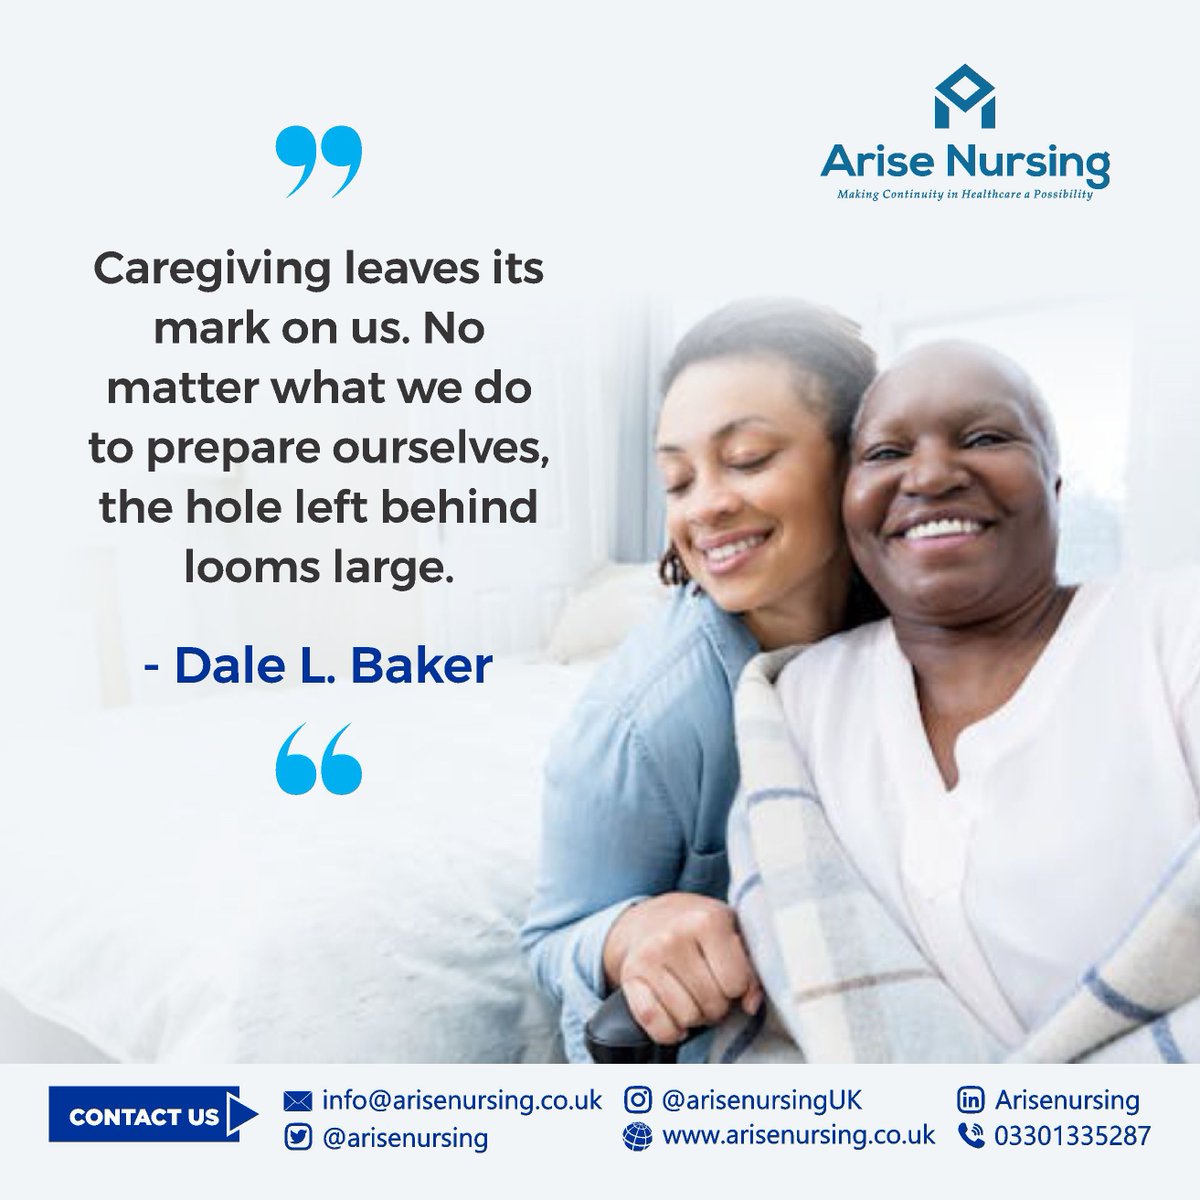 #QuoteOfTheWeek

“Caregiving leaves its mark on us. No matter what we do to prepare ourselves, the hole left behind looms large.”

- Dale L. Baker